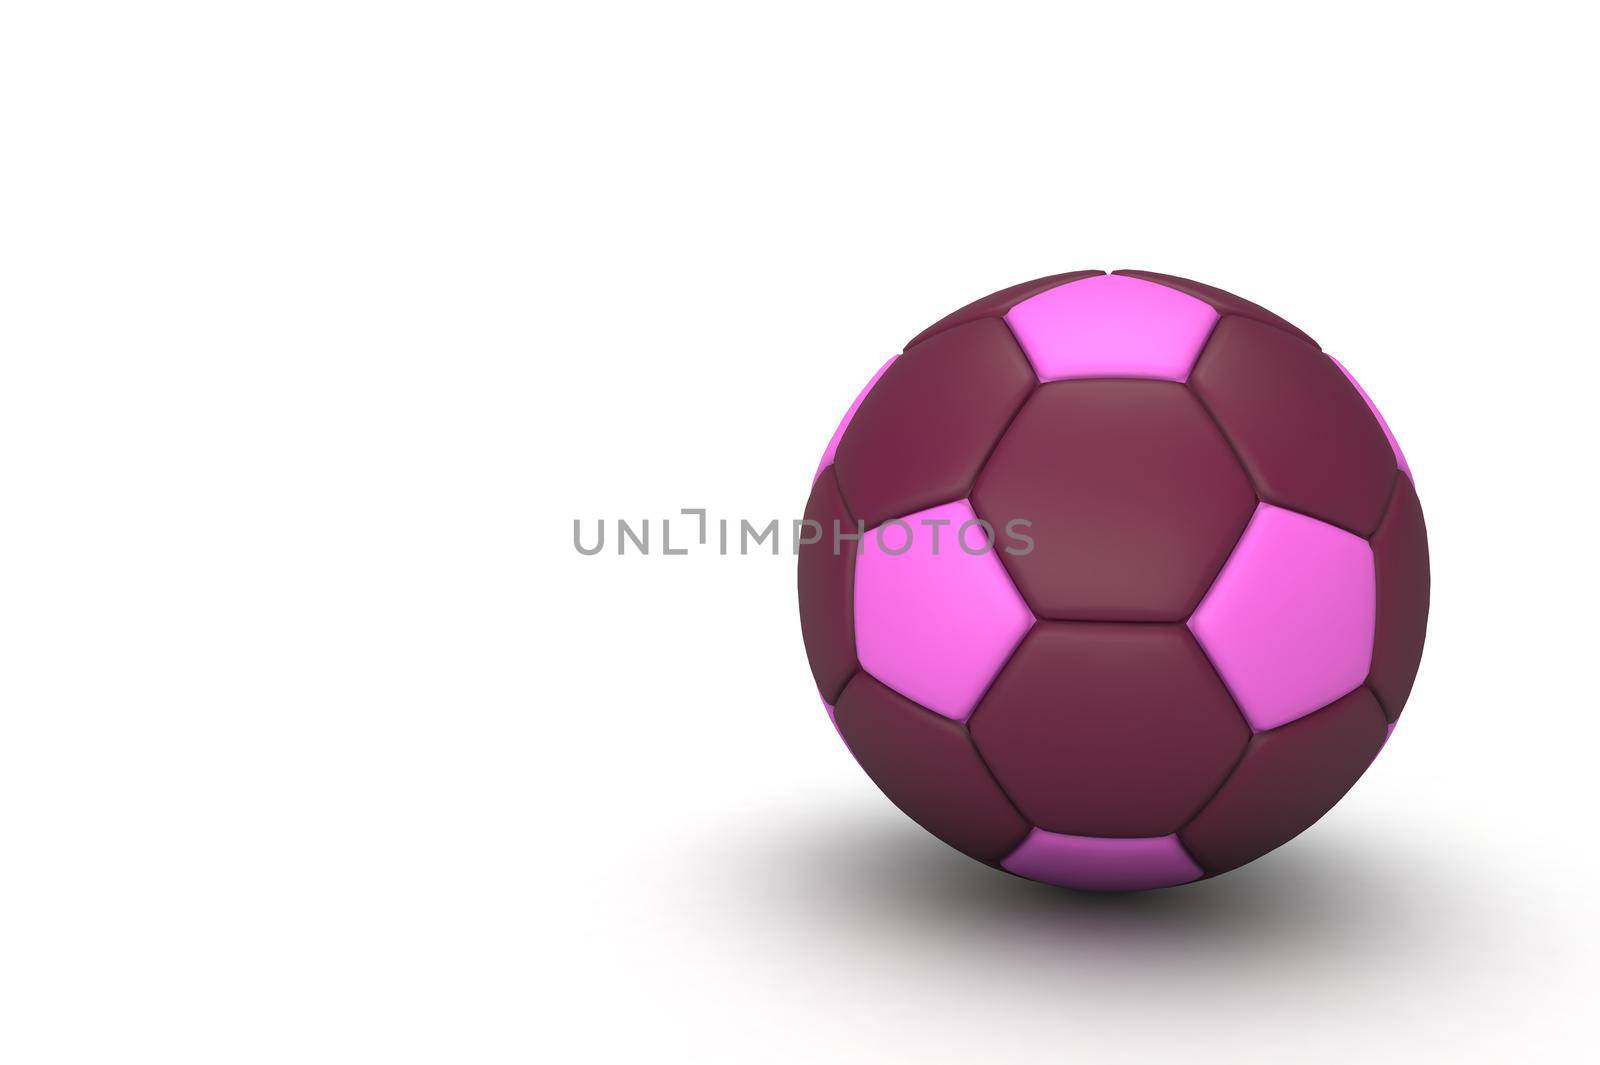 Classic 3D soccer ball in purple colors on a white blank background